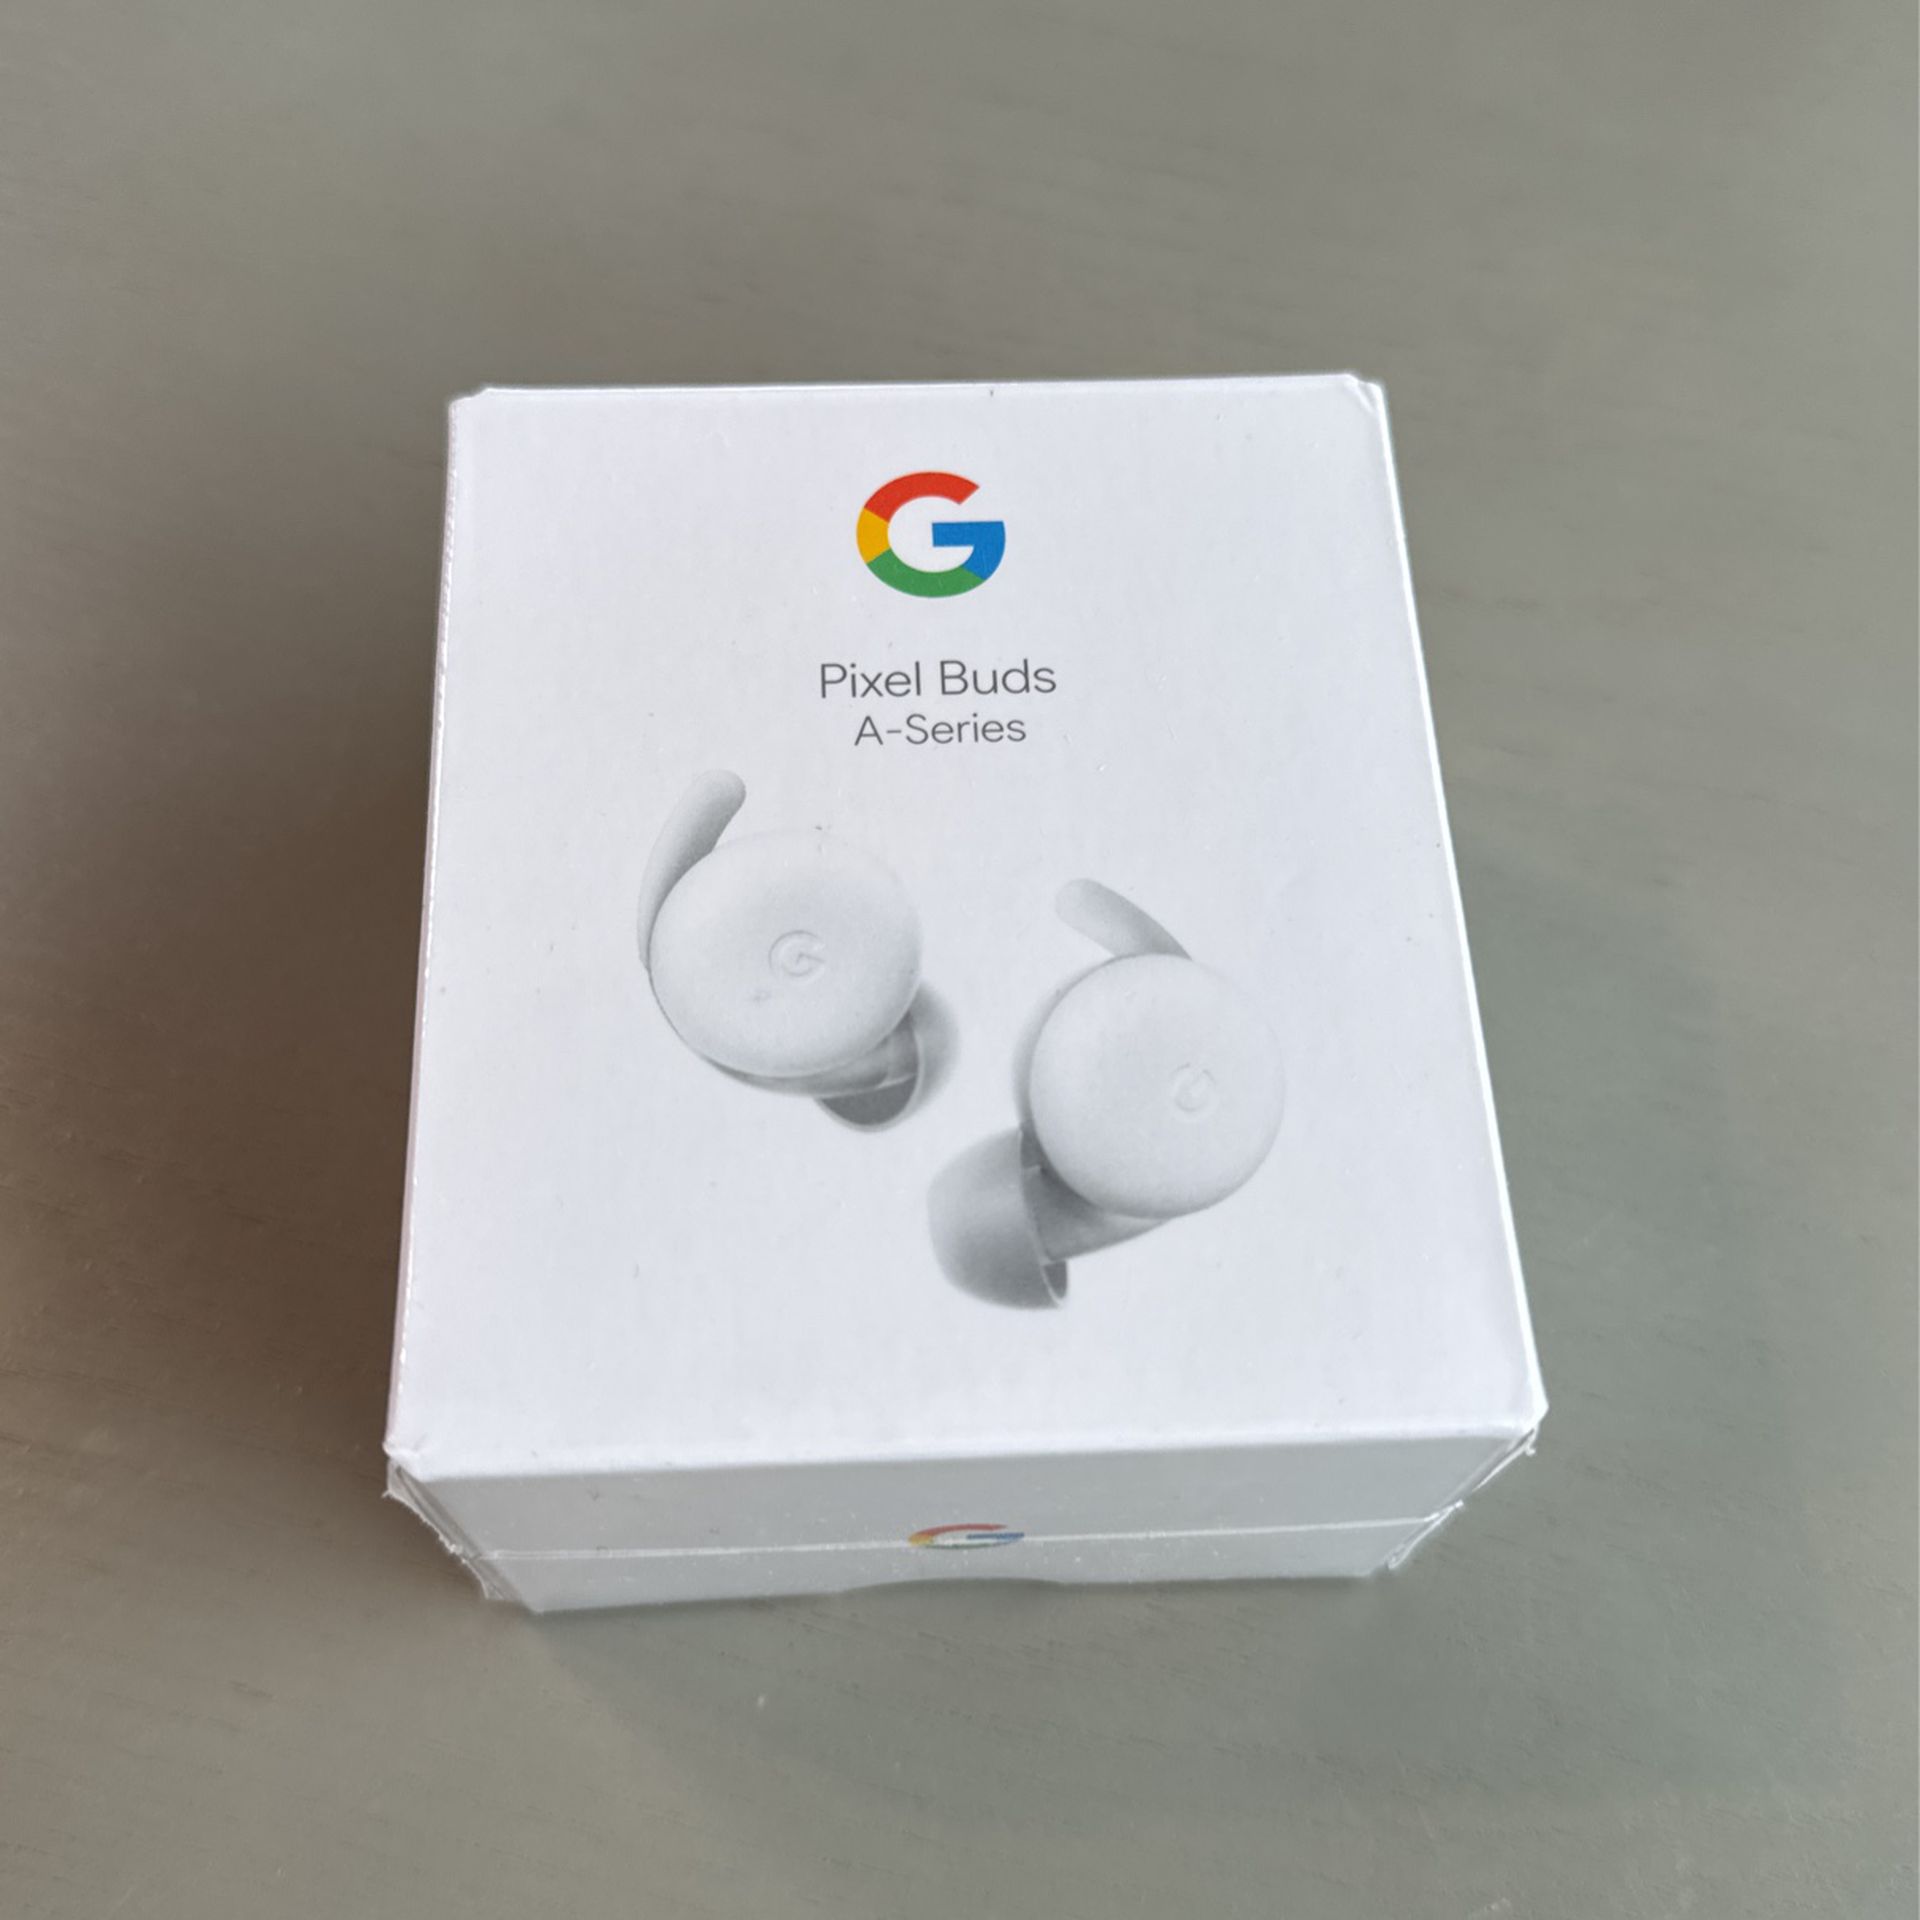 Pixel Buds A-Series New In Box